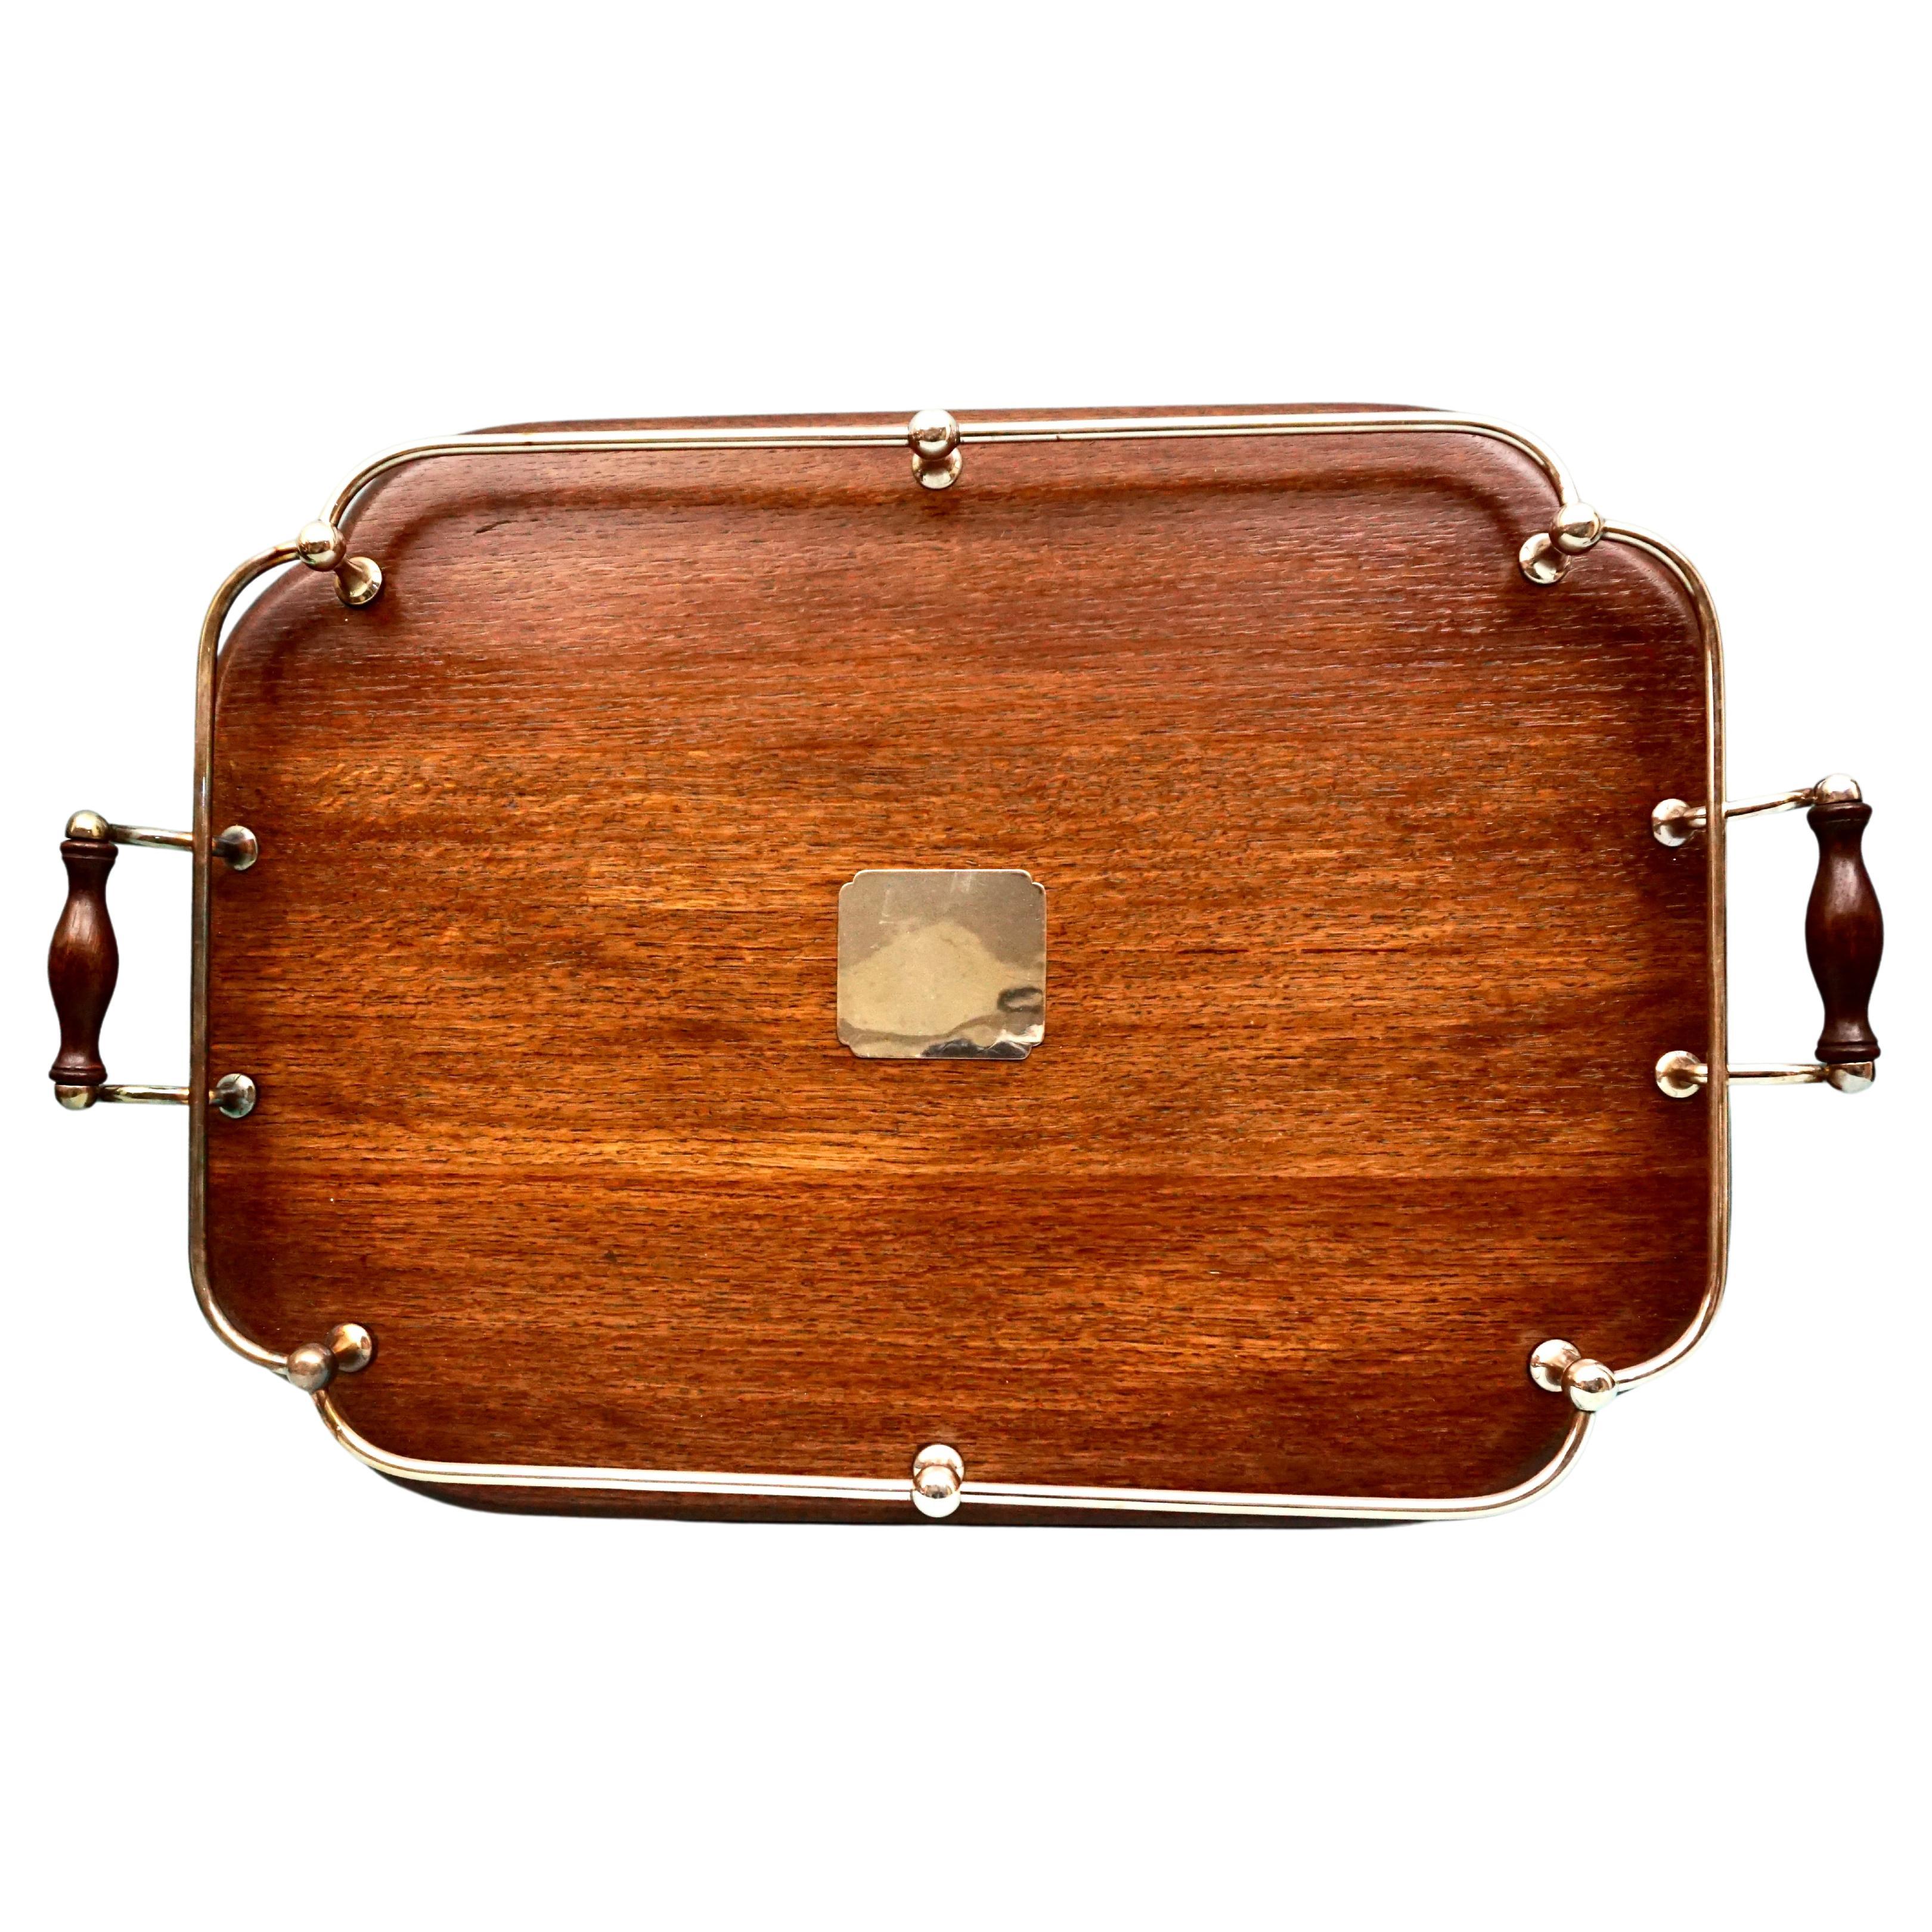 English Edwardian Mahogany Tray with Silver Plated Handles and Gallery